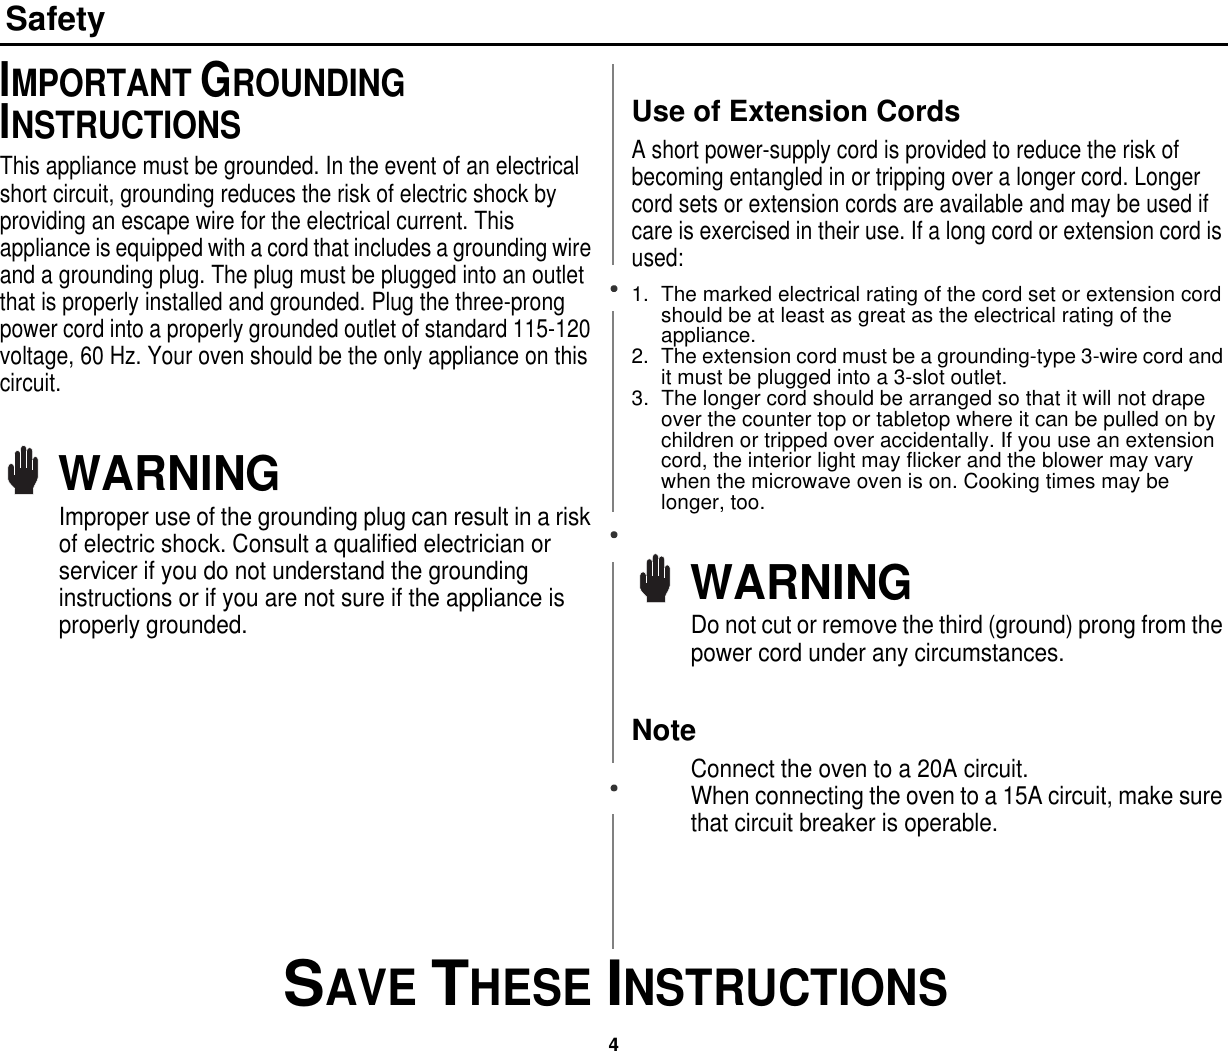 4 SAVE THESE INSTRUCTIONSSafetyIMPORTANT GROUNDING INSTRUCTIONSThis appliance must be grounded. In the event of an electrical short circuit, grounding reduces the risk of electric shock by providing an escape wire for the electrical current. This appliance is equipped with a cord that includes a grounding wire and a grounding plug. The plug must be plugged into an outlet that is properly installed and grounded. Plug the three-prong power cord into a properly grounded outlet of standard 115-120 voltage, 60 Hz. Your oven should be the only appliance on this circuit.WARNINGImproper use of the grounding plug can result in a risk of electric shock. Consult a qualified electrician or servicer if you do not understand the grounding instructions or if you are not sure if the appliance is properly grounded.Use of Extension Cords A short power-supply cord is provided to reduce the risk of becoming entangled in or tripping over a longer cord. Longer cord sets or extension cords are available and may be used if care is exercised in their use. If a long cord or extension cord is used:1. The marked electrical rating of the cord set or extension cord should be at least as great as the electrical rating of the appliance.2. The extension cord must be a grounding-type 3-wire cord and it must be plugged into a 3-slot outlet. 3. The longer cord should be arranged so that it will not drape over the counter top or tabletop where it can be pulled on by children or tripped over accidentally. If you use an extension cord, the interior light may flicker and the blower may vary when the microwave oven is on. Cooking times may be longer, too.WARNINGDo not cut or remove the third (ground) prong from the power cord under any circumstances.NoteConnect the oven to a 20A circuit.                          When connecting the oven to a 15A circuit, make sure that circuit breaker is operable.